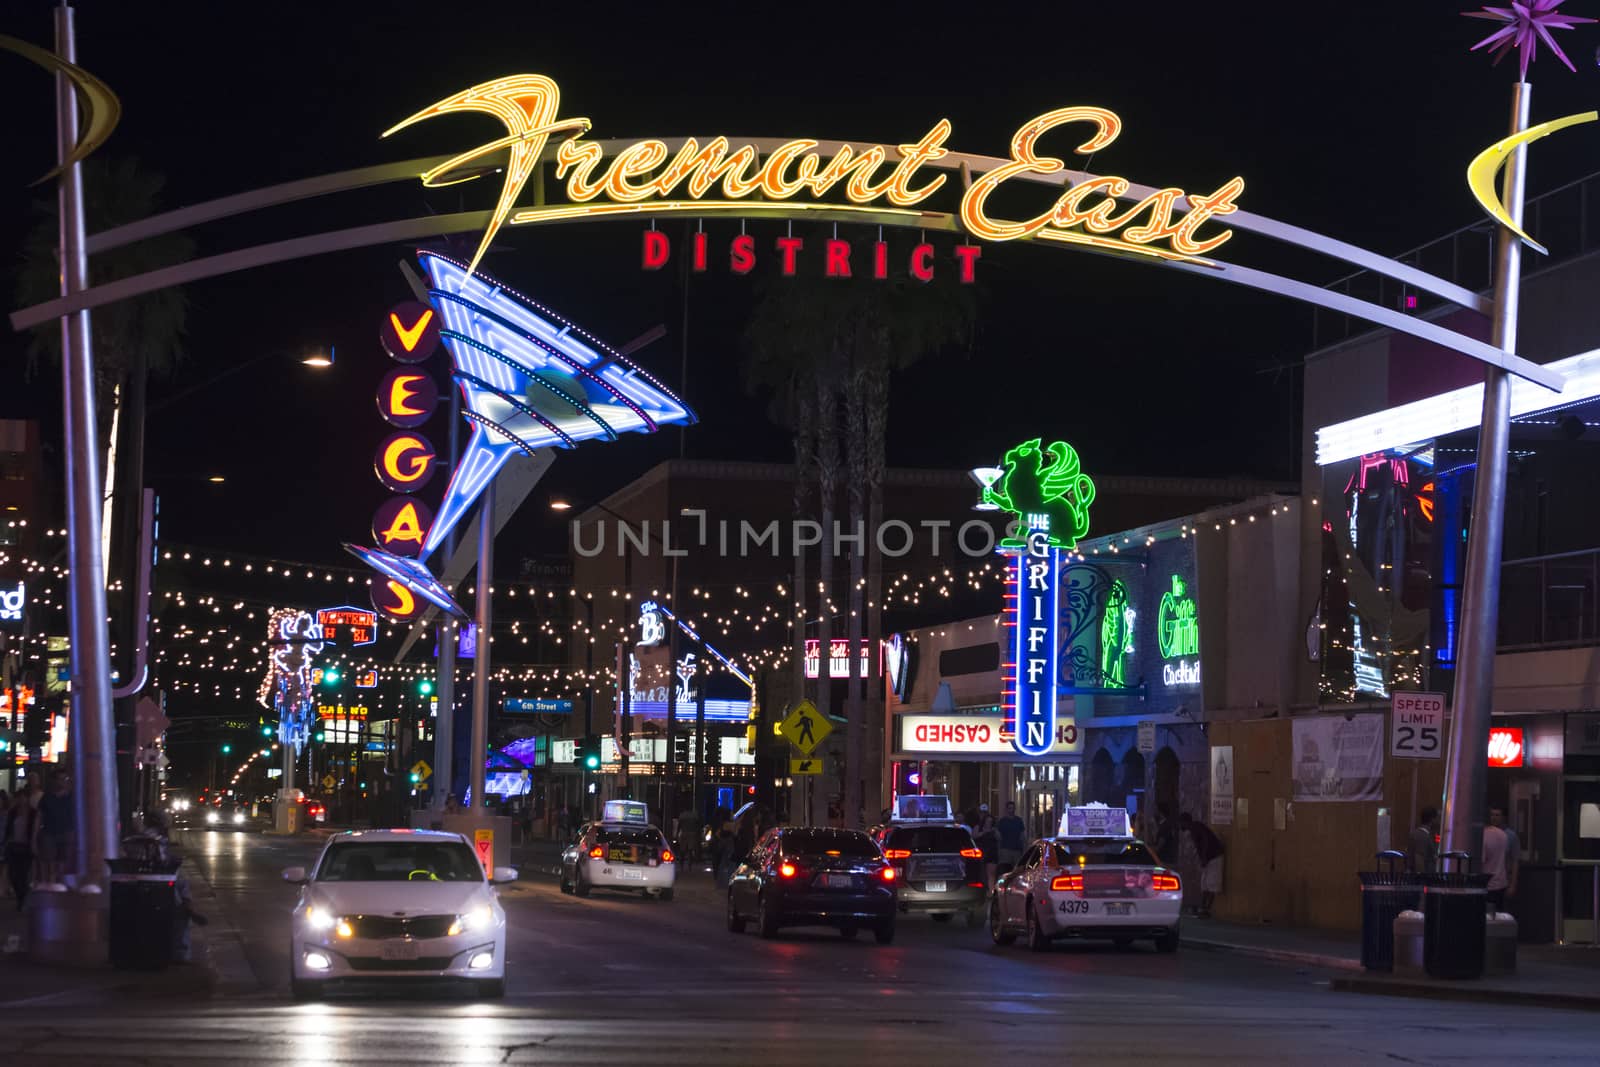 LAS VEGAS, USA - MAY 28, 2015: Neon sign is illuminated at night over Fremont street indicating beginning the Fremont East District next to the famous Fremont Street Experience in Las Vegas